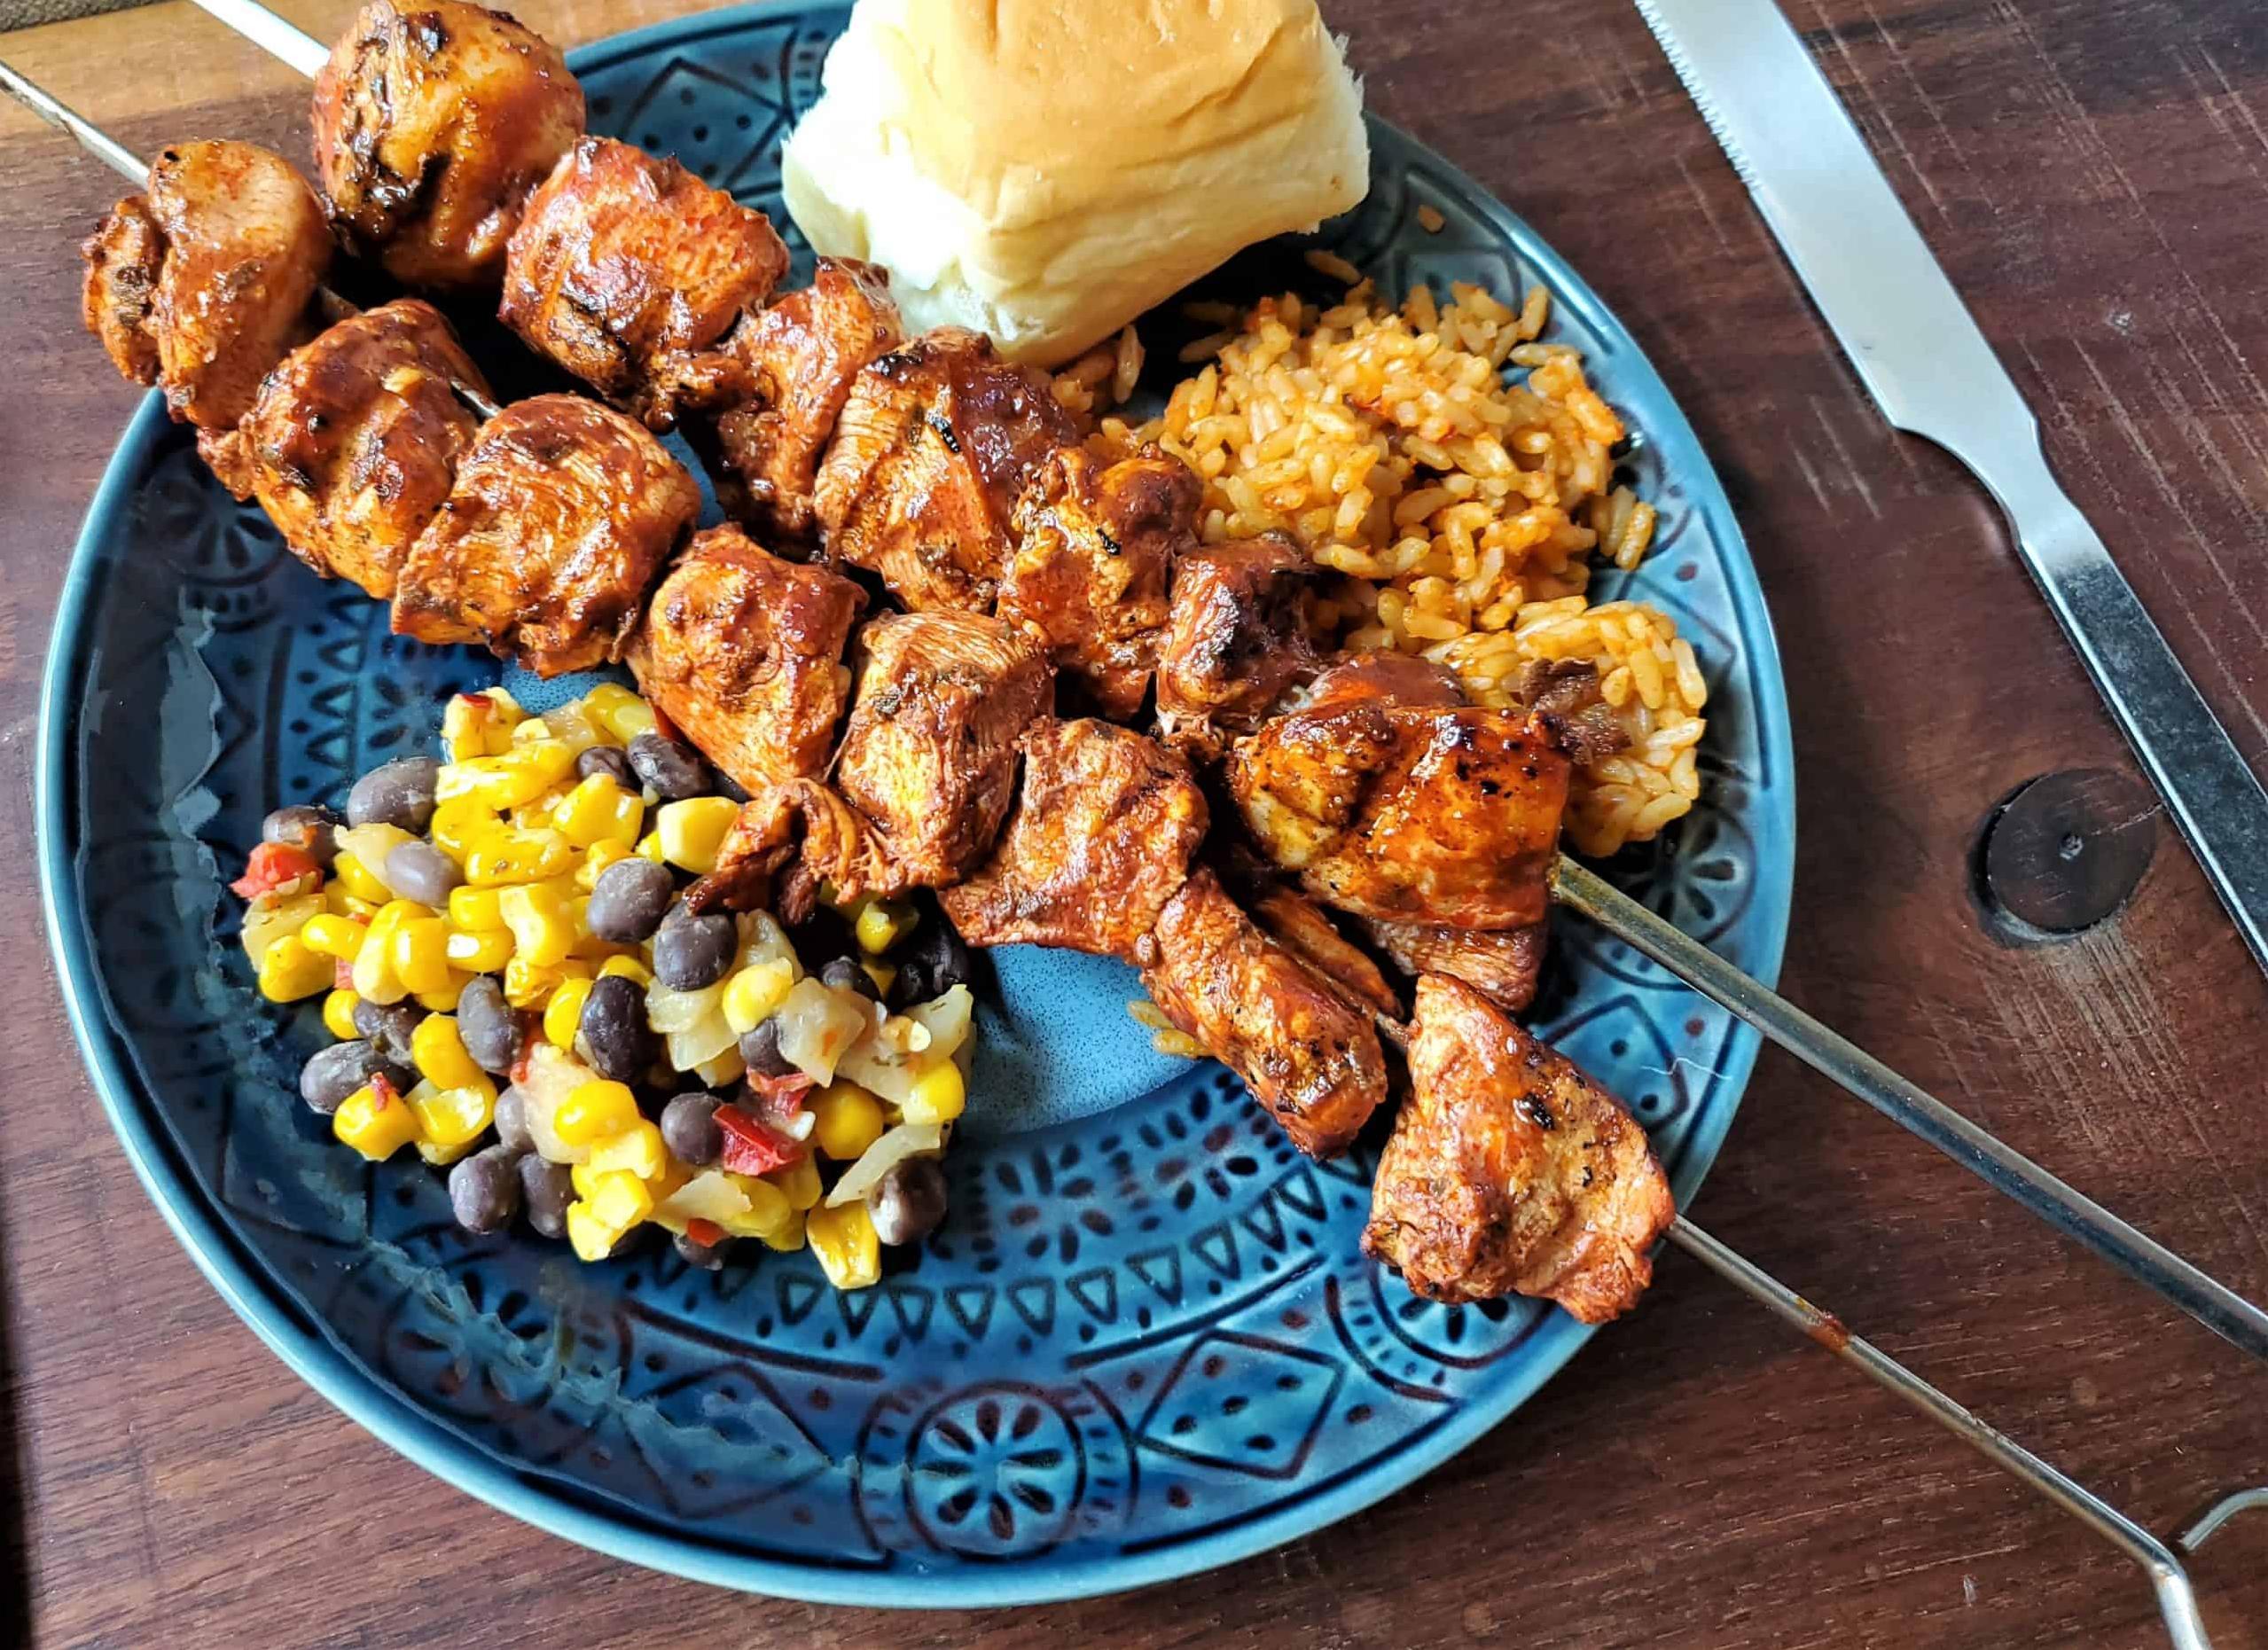  Take the party outside and fire up the grill for these delicious Anticuchos De Pollo.